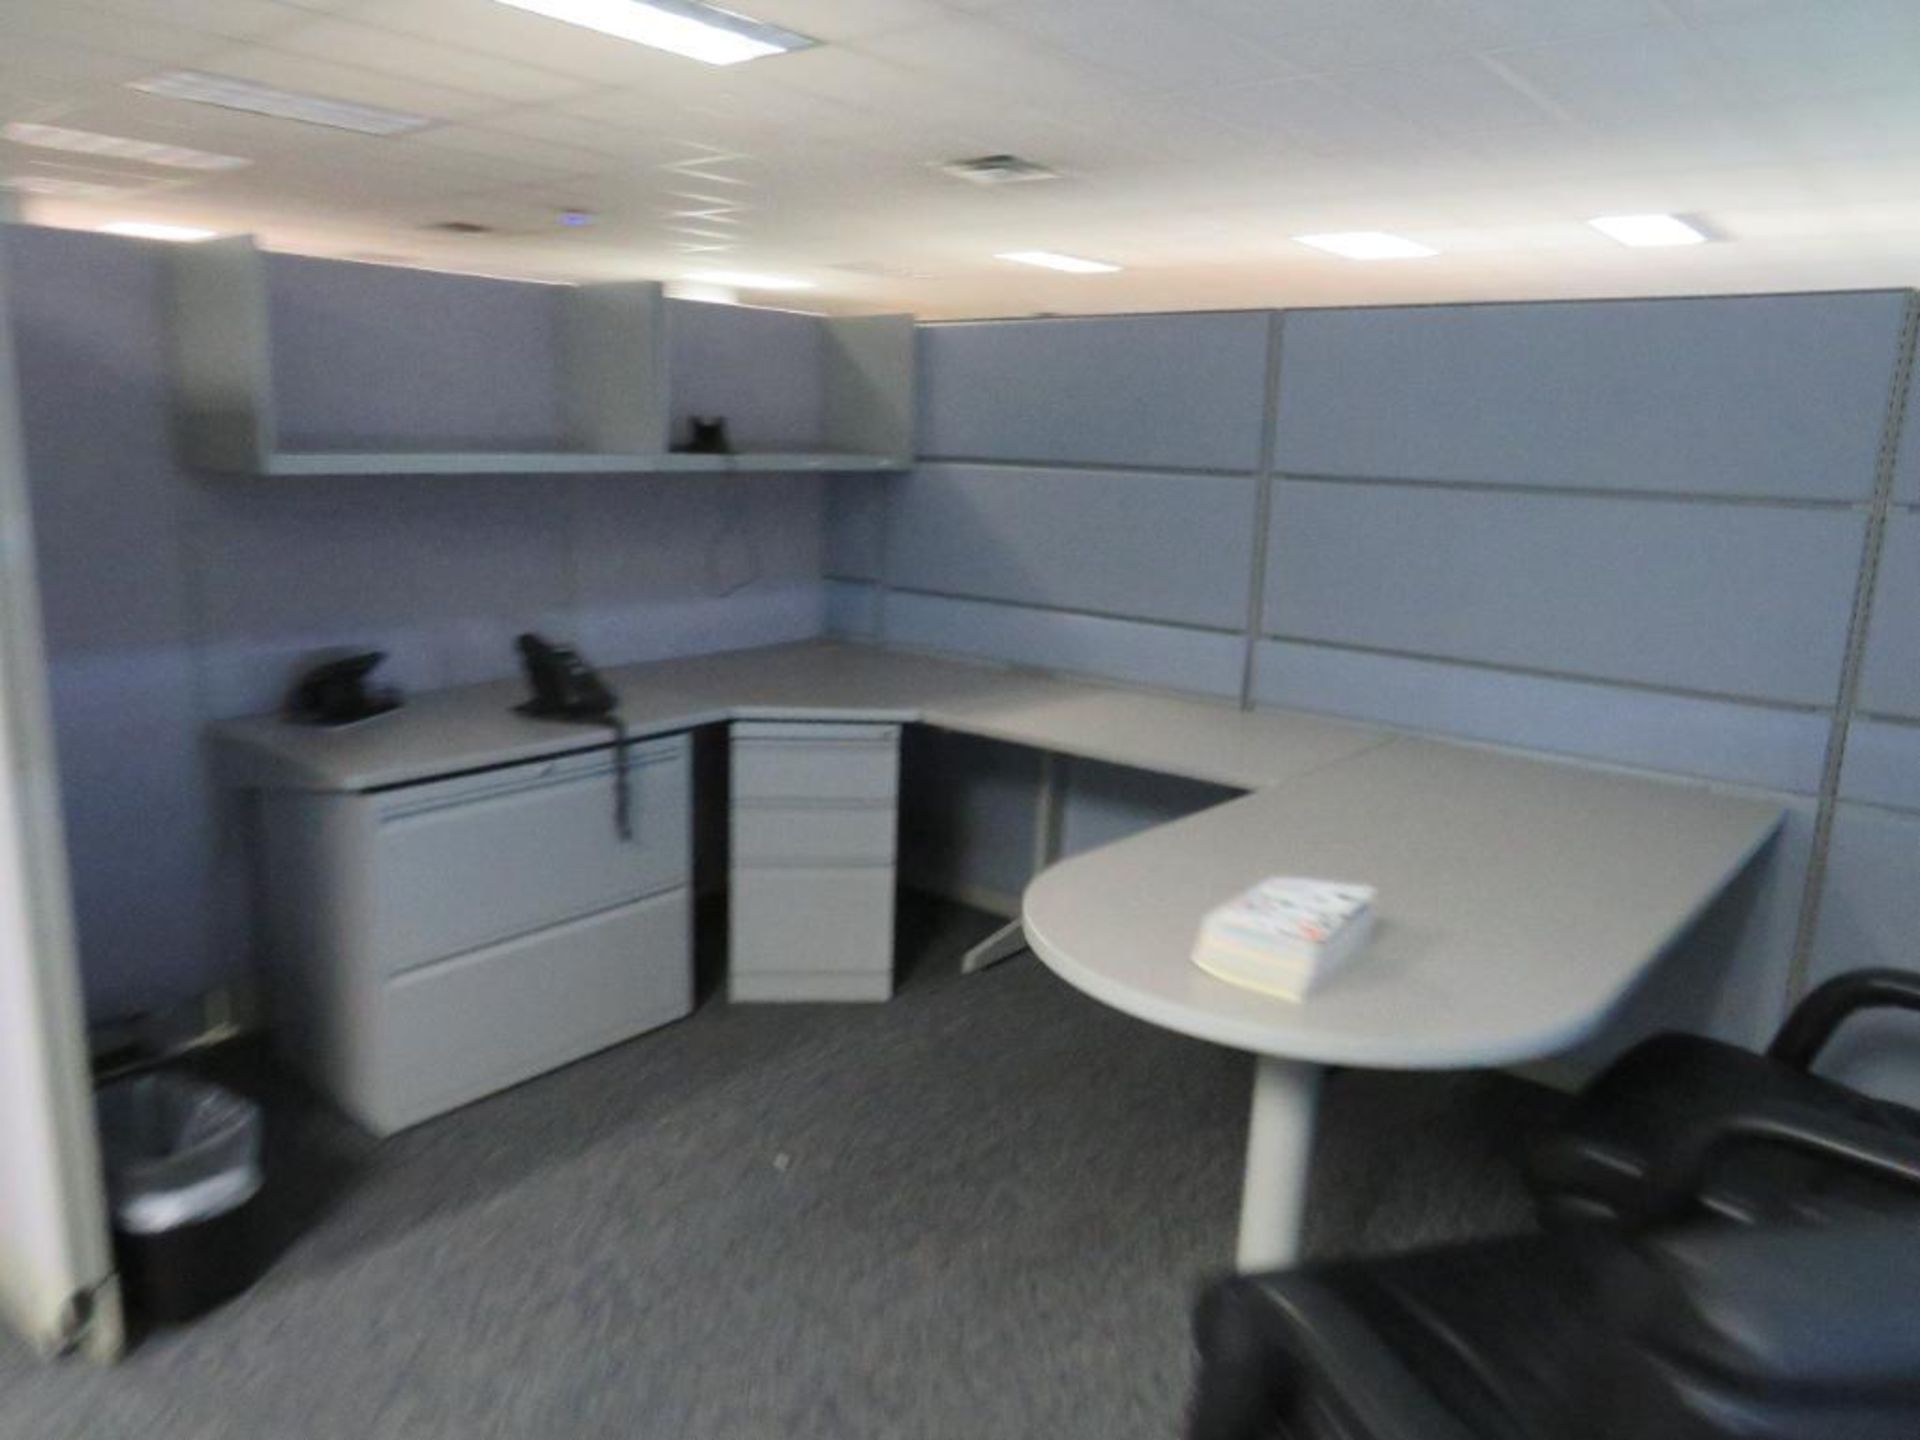 Lot c/o: Appx 6,400 Sq Ft of Cubicles (4000 Sq Ft of 67" High & 2400 Sq Ft of 53" High), Appx 57 Off - Image 6 of 23